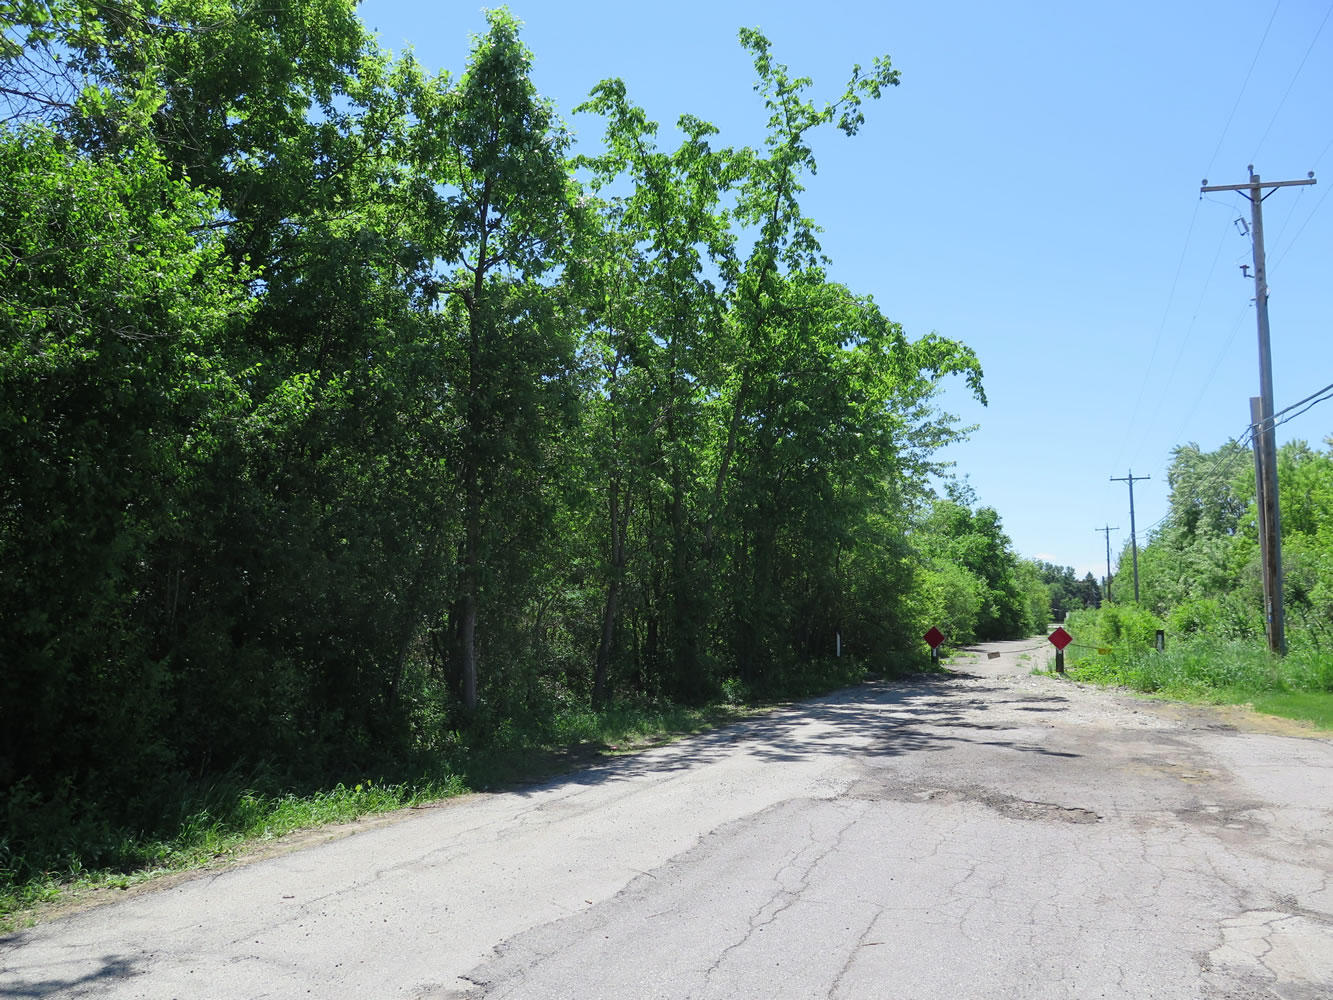 The road in Waukesha, Wis., where a bicyclist found a 12-year-old girl who had 19 stab wounds is shown Tuesday.